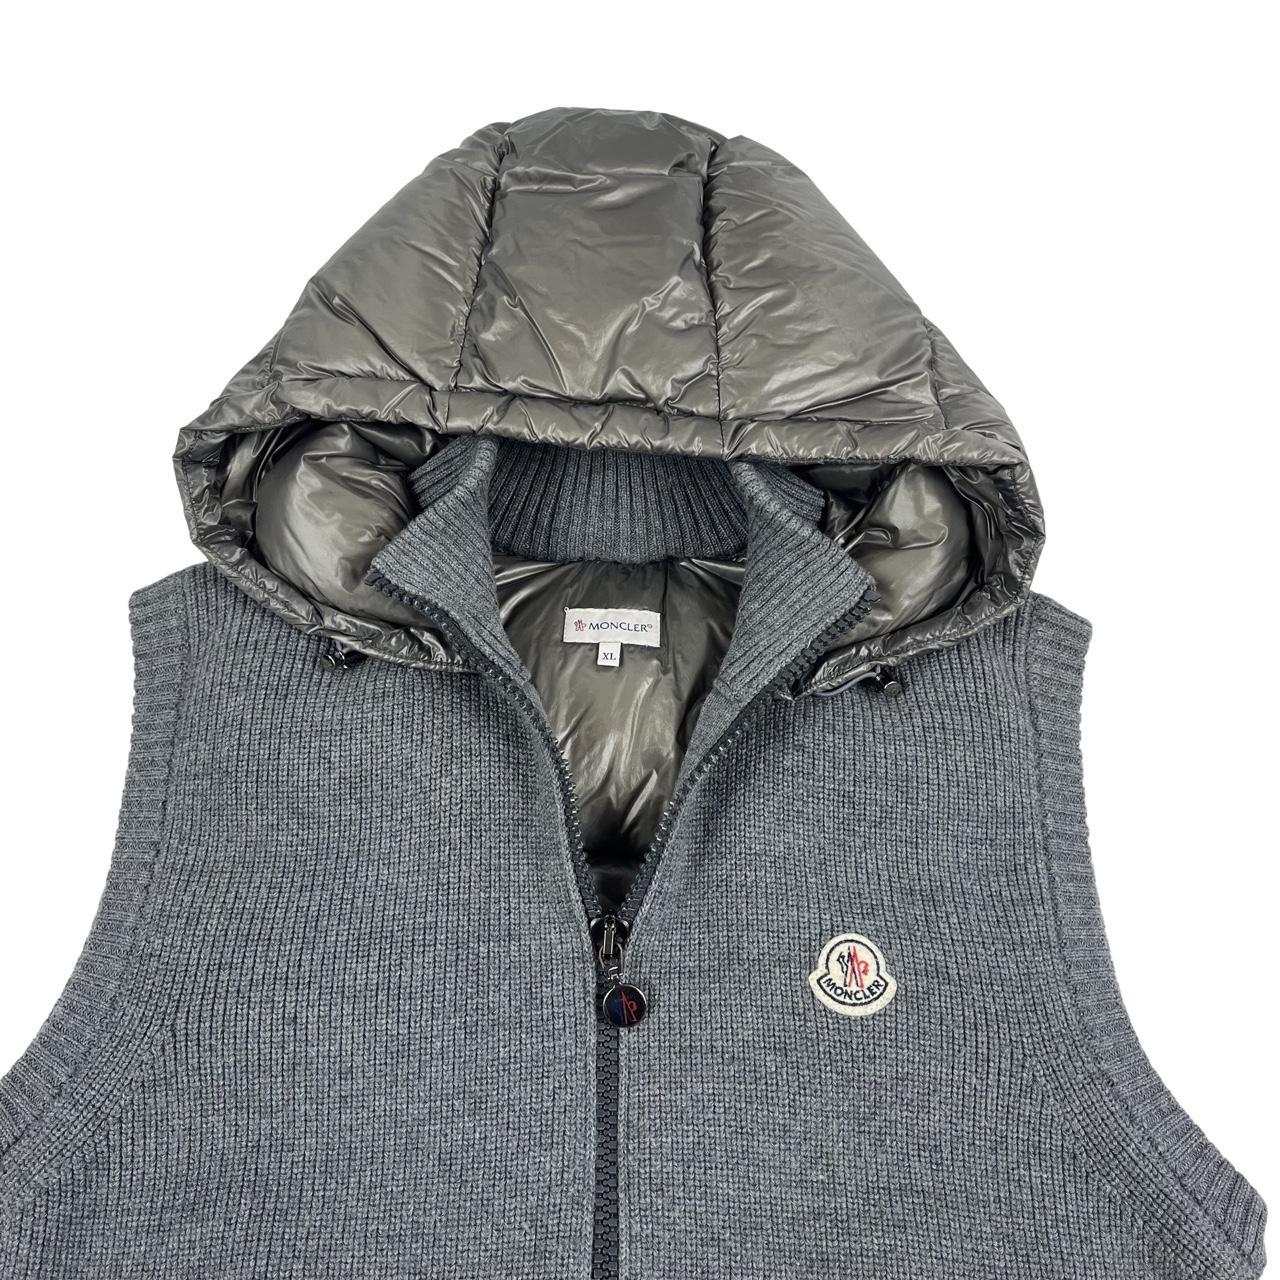 Moncler Maglione Tricot Cardigan Puffer Gilet, •